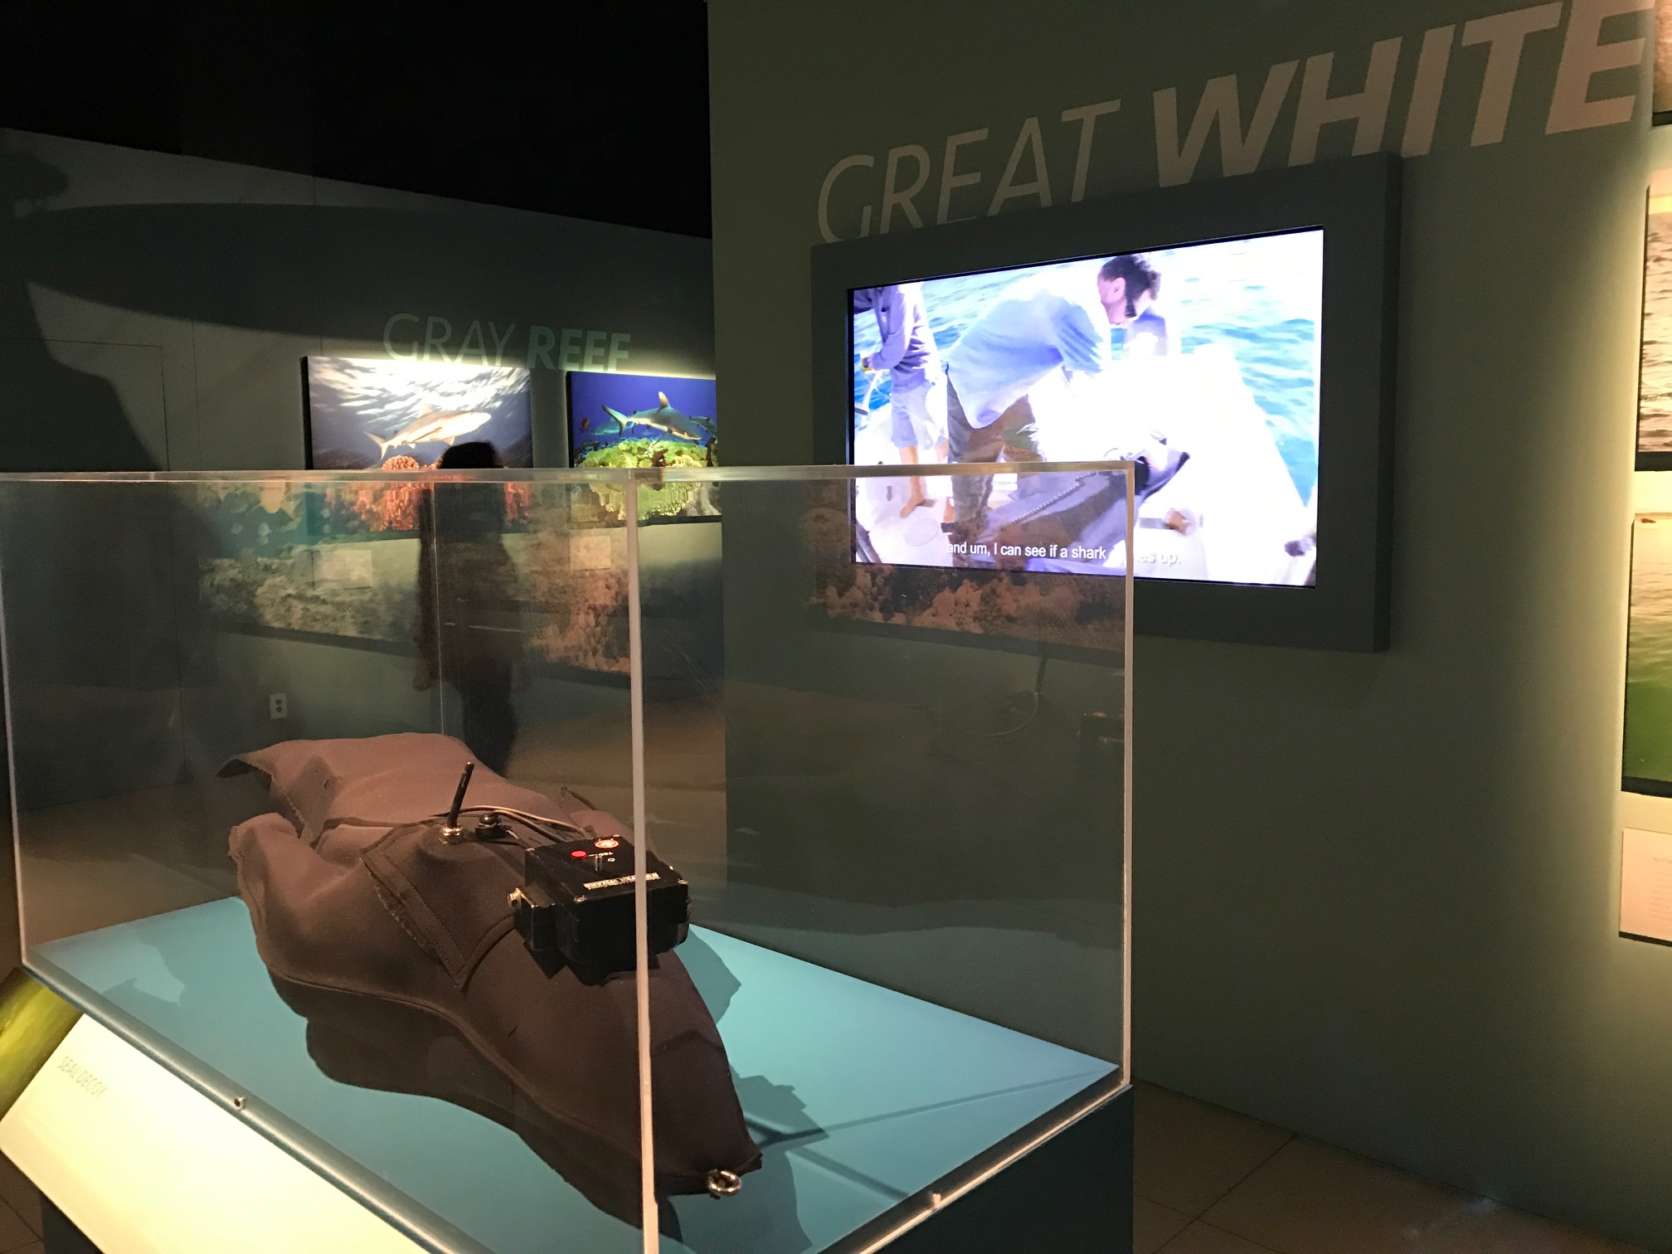 On display in the exhibit, a specially designed camera made to look like the body of a seal which Brian Skerry used to lure a Great White Shark to the camera off Cape Cod, Massachusetts. (WTOP/Megan Cloherty)